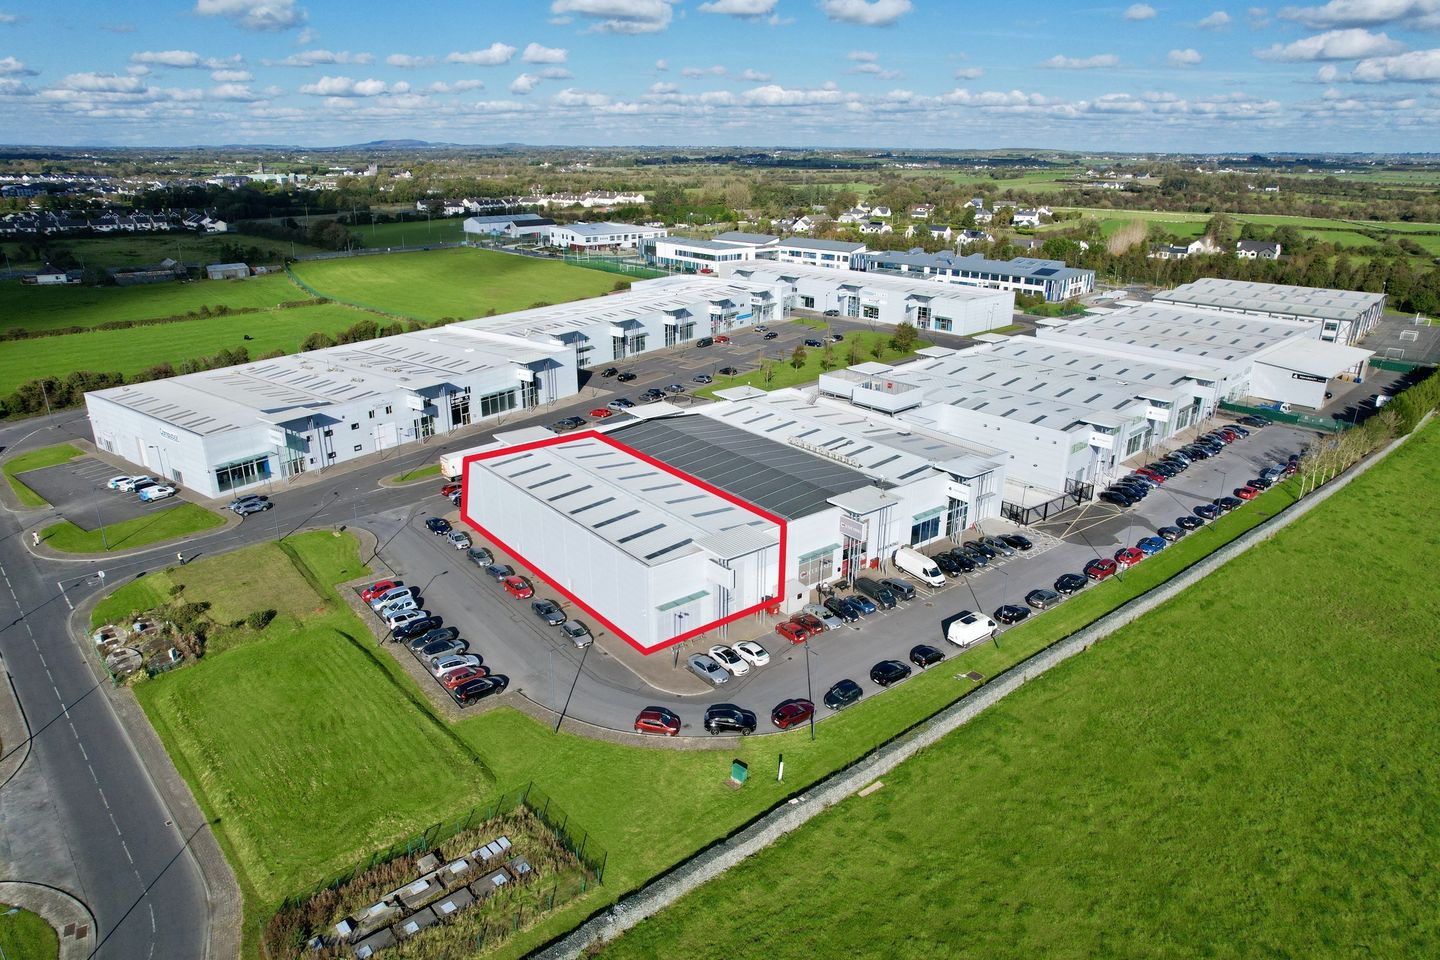 Unit 4, Claregalway Corporate Park, Claregalway, Co. Galway